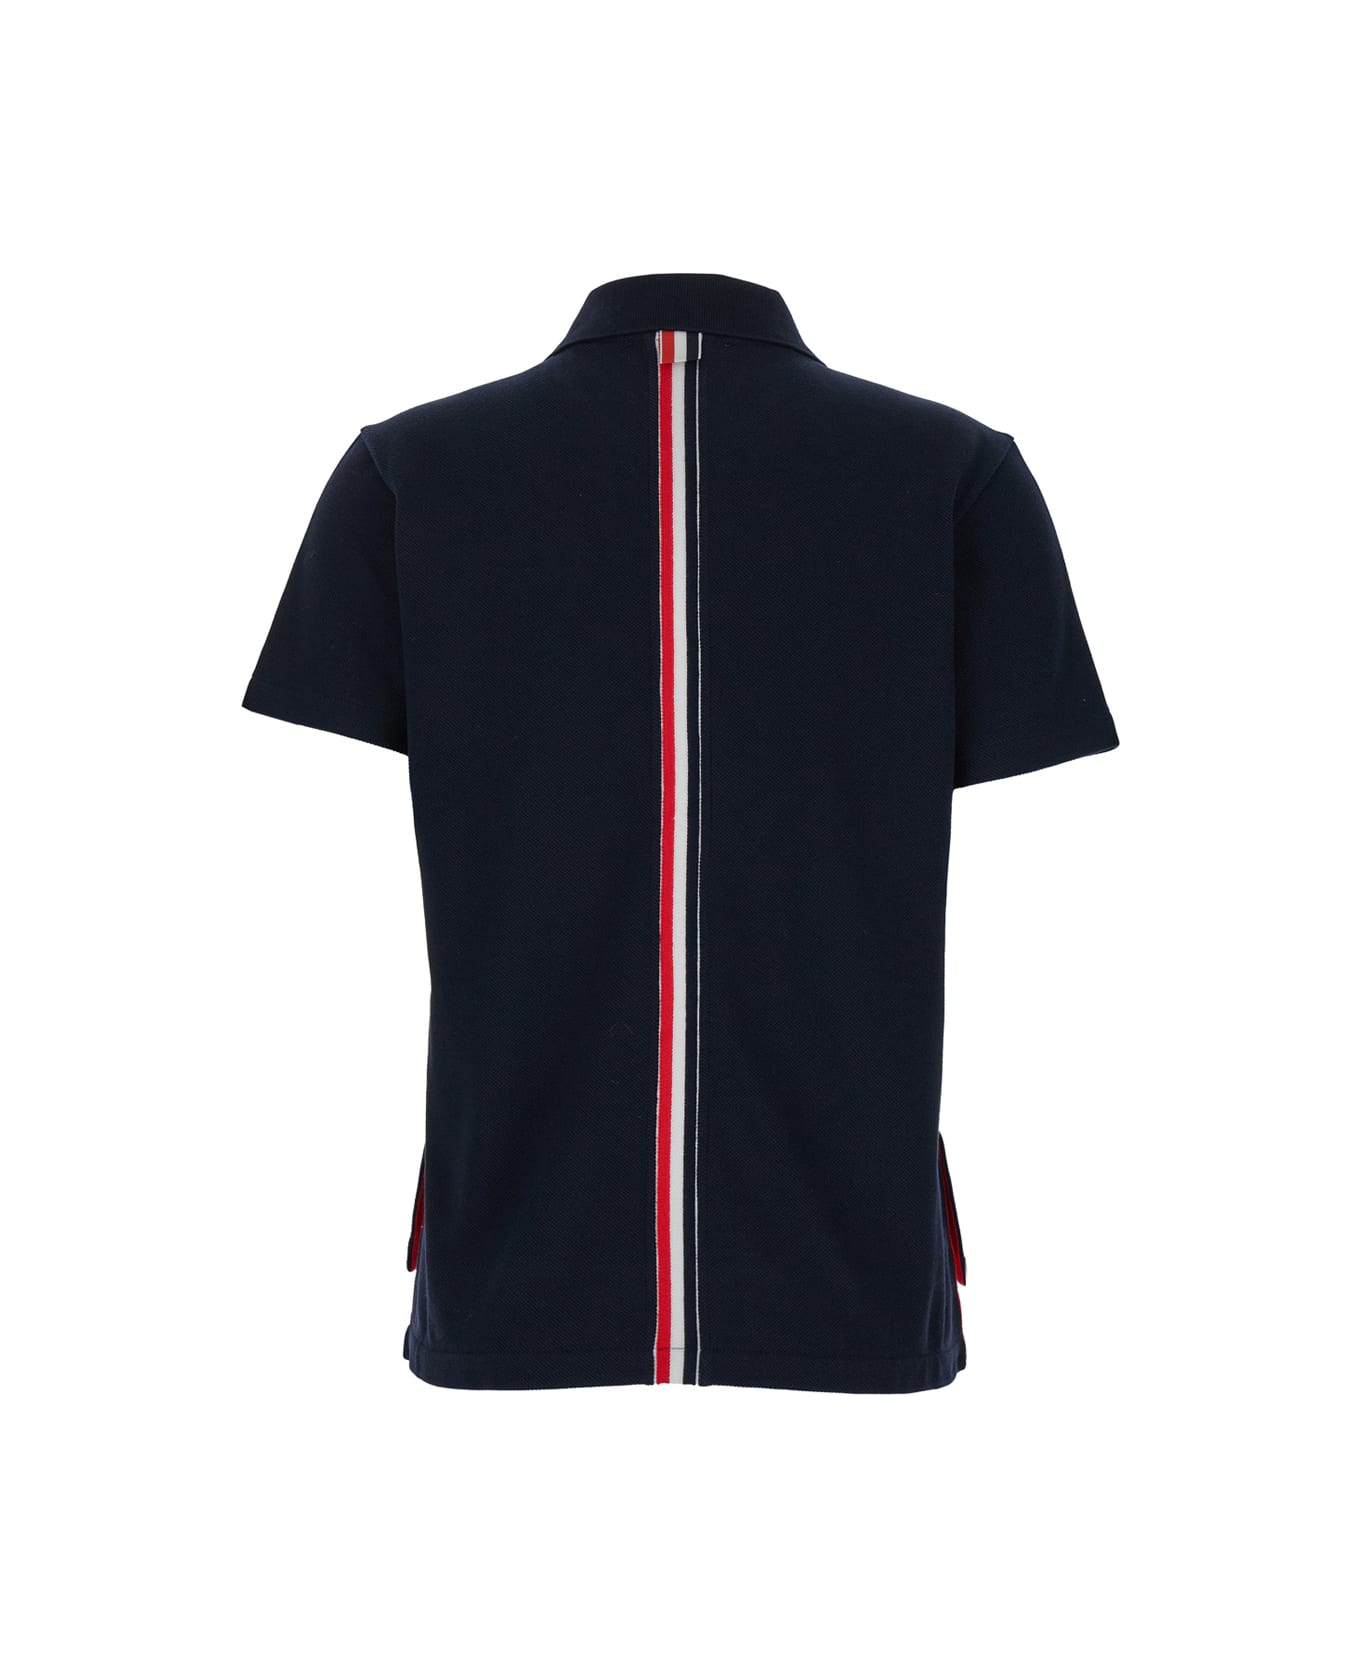 Thom Browne Relaxed Fit Short Sleeve Polo W/ Center Back Rwb Stripe In Classic Pique - Blu